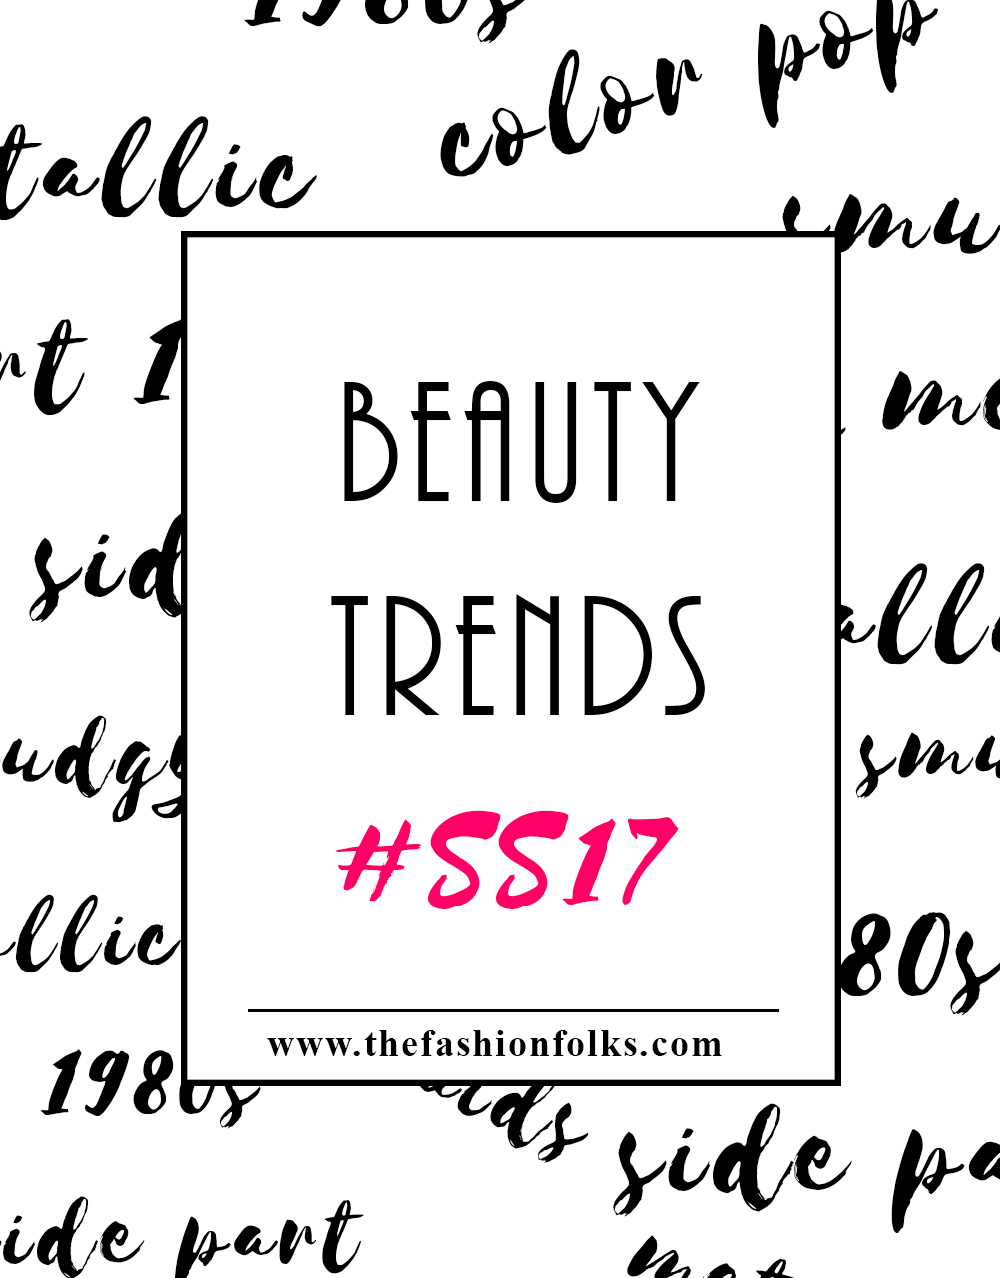 Beauty Trends Spring 2017 | The Fashion Folks